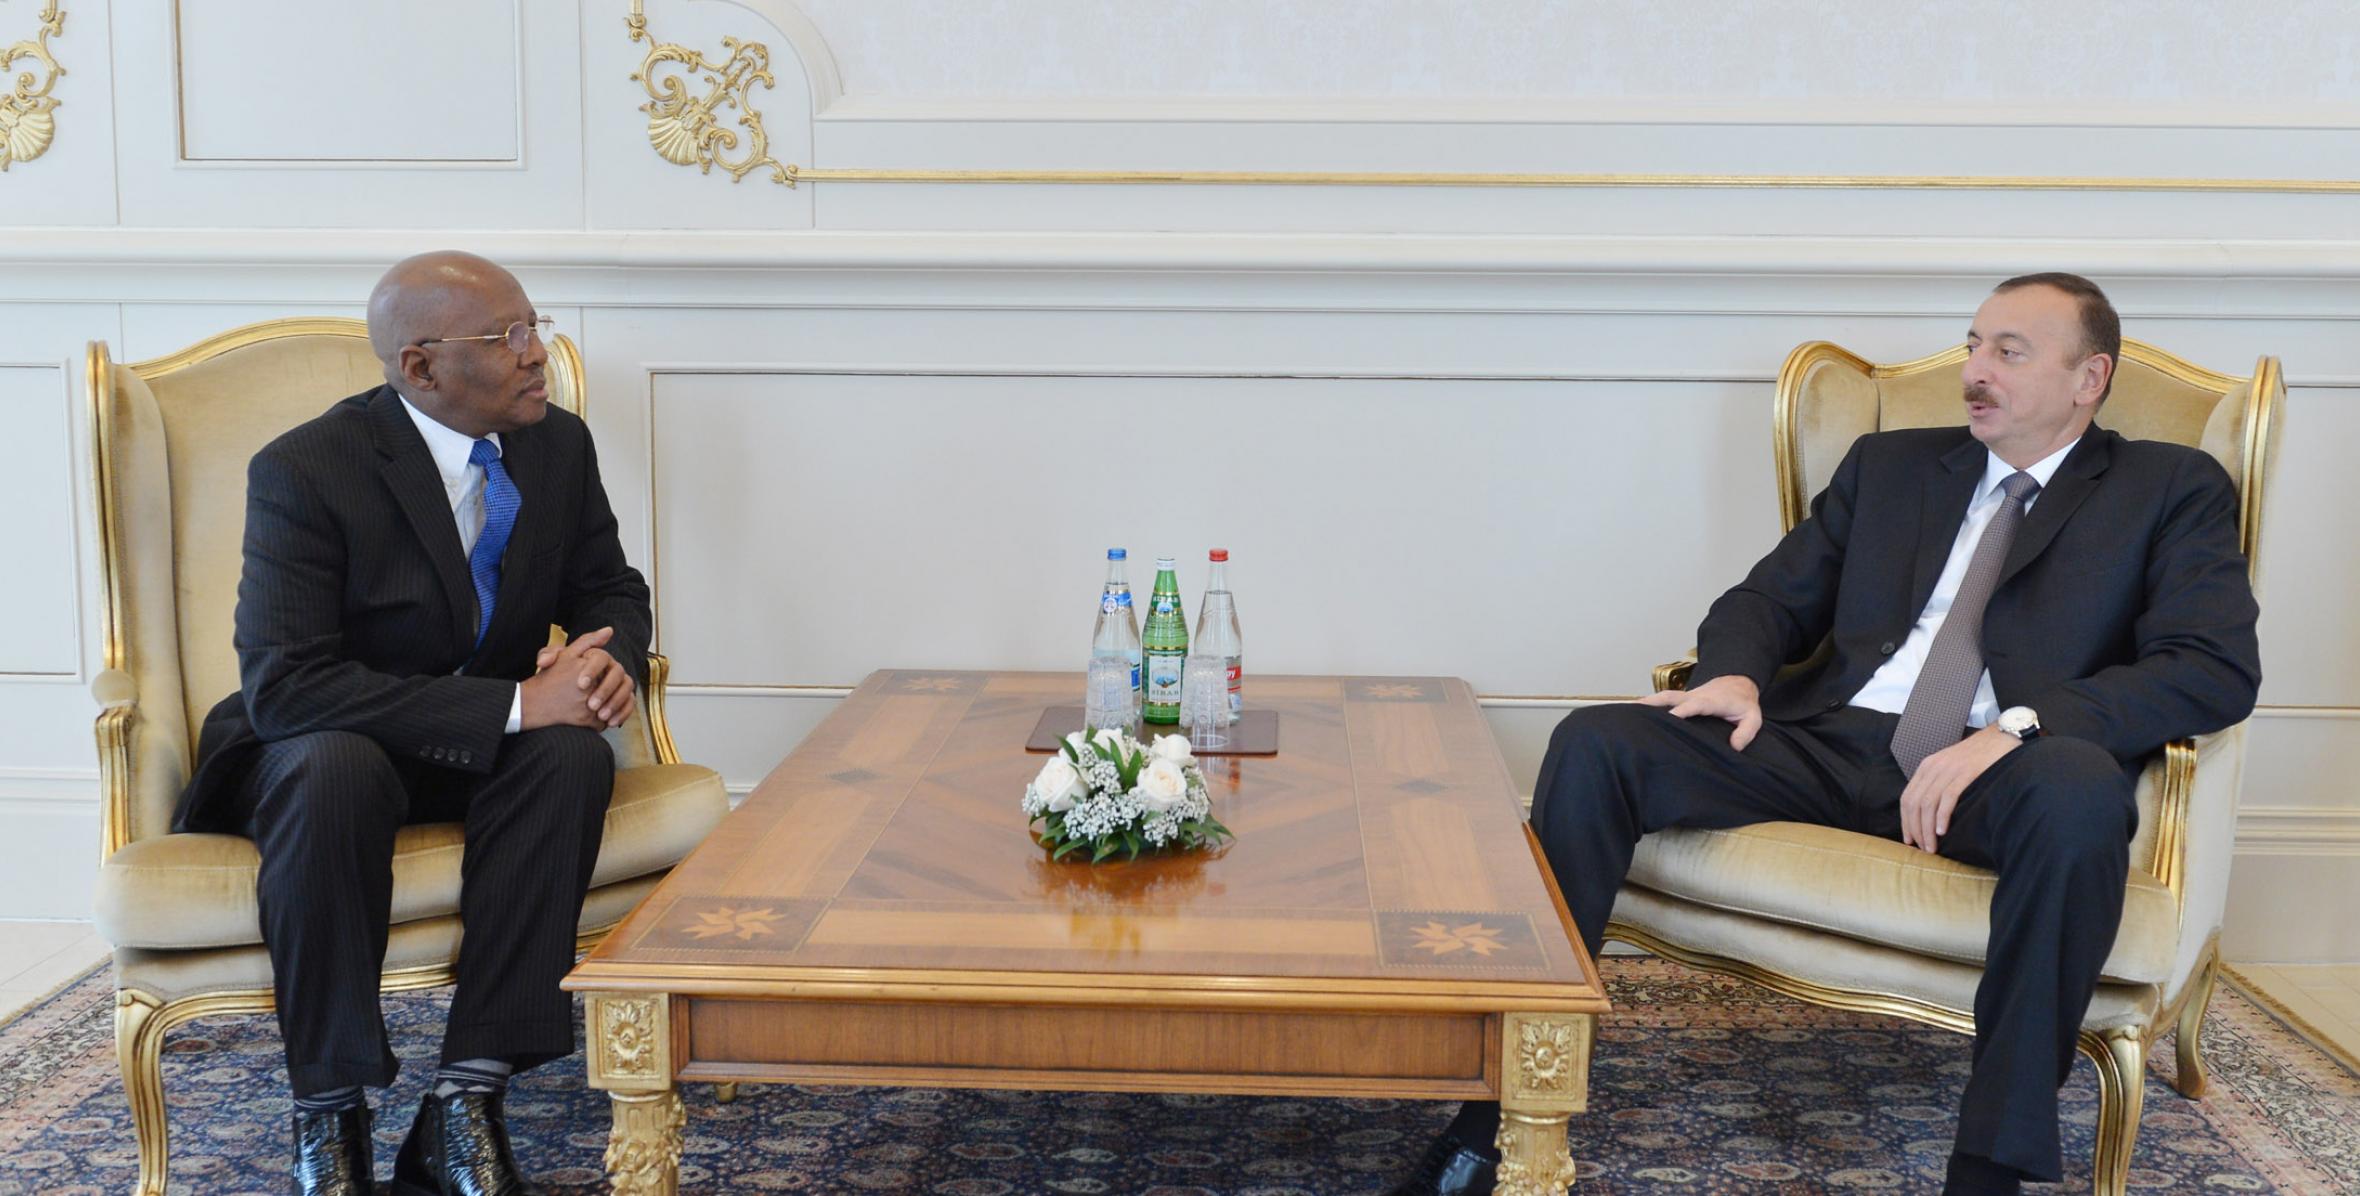 Ilham Aliyev received the credentials of the newly-appointed Ambassador of Guinea to Azerbaijan